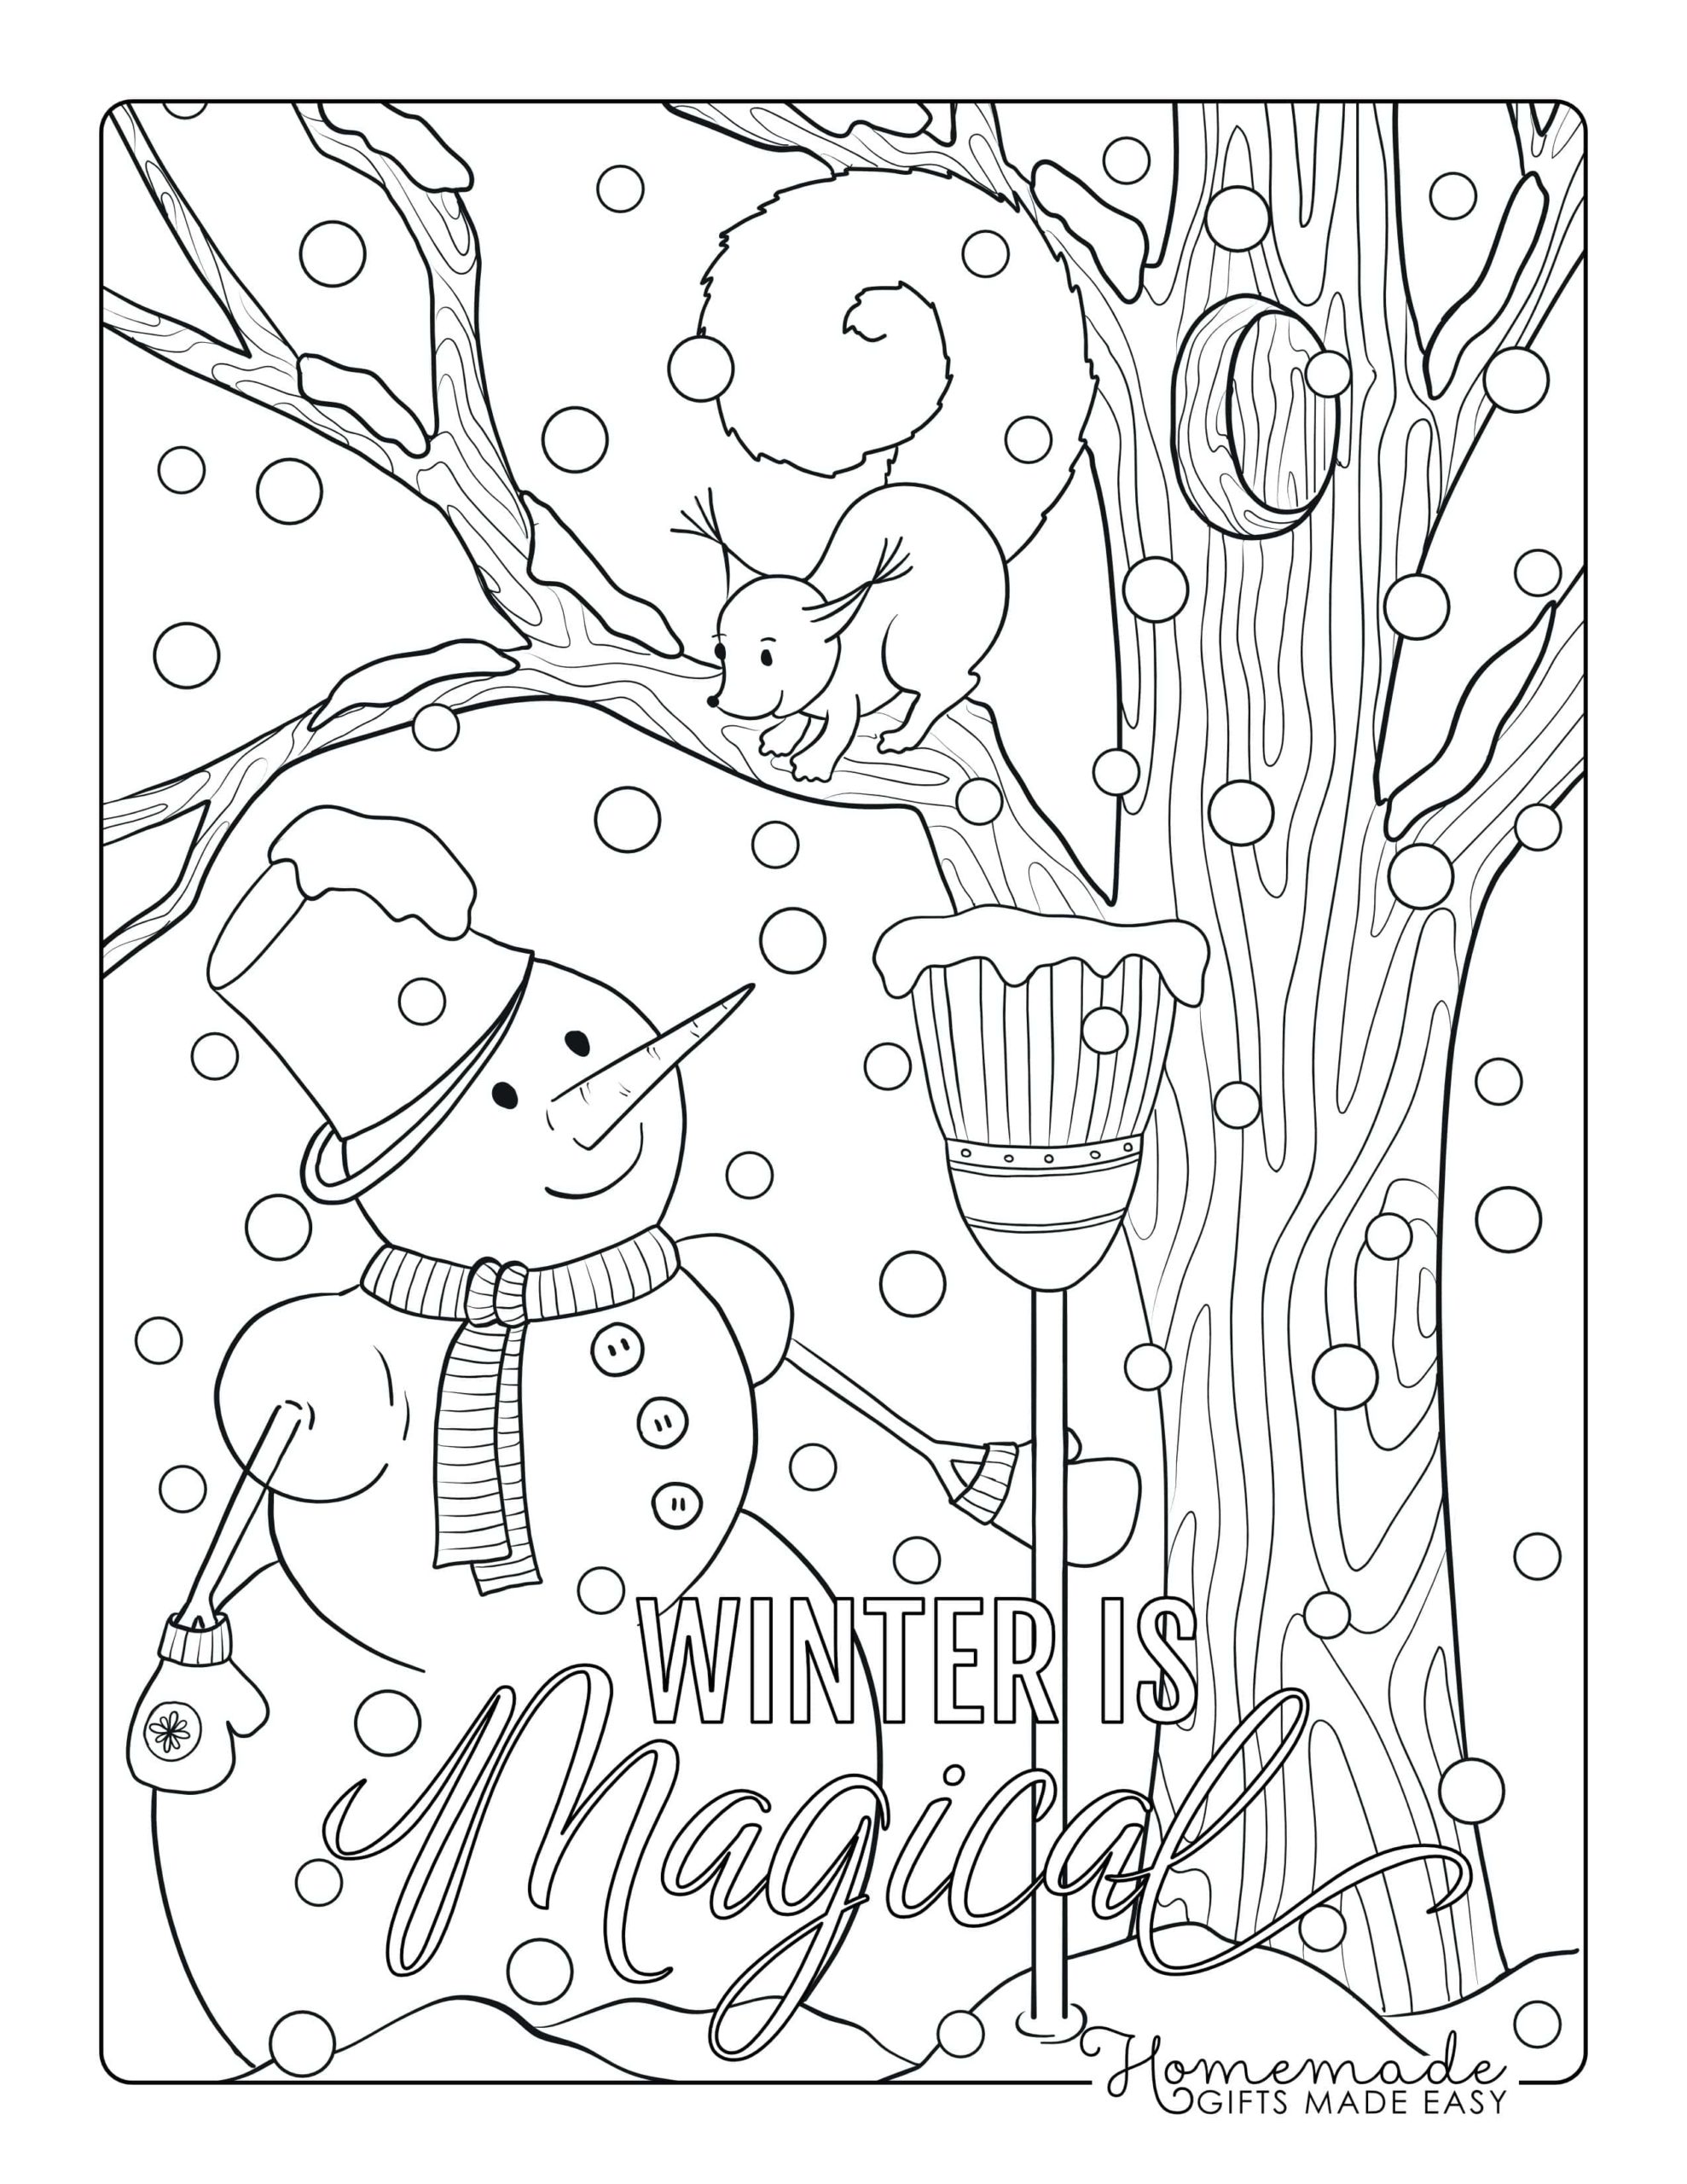 snowbear-coloring-page-printable-coloring-page-downloadable-page